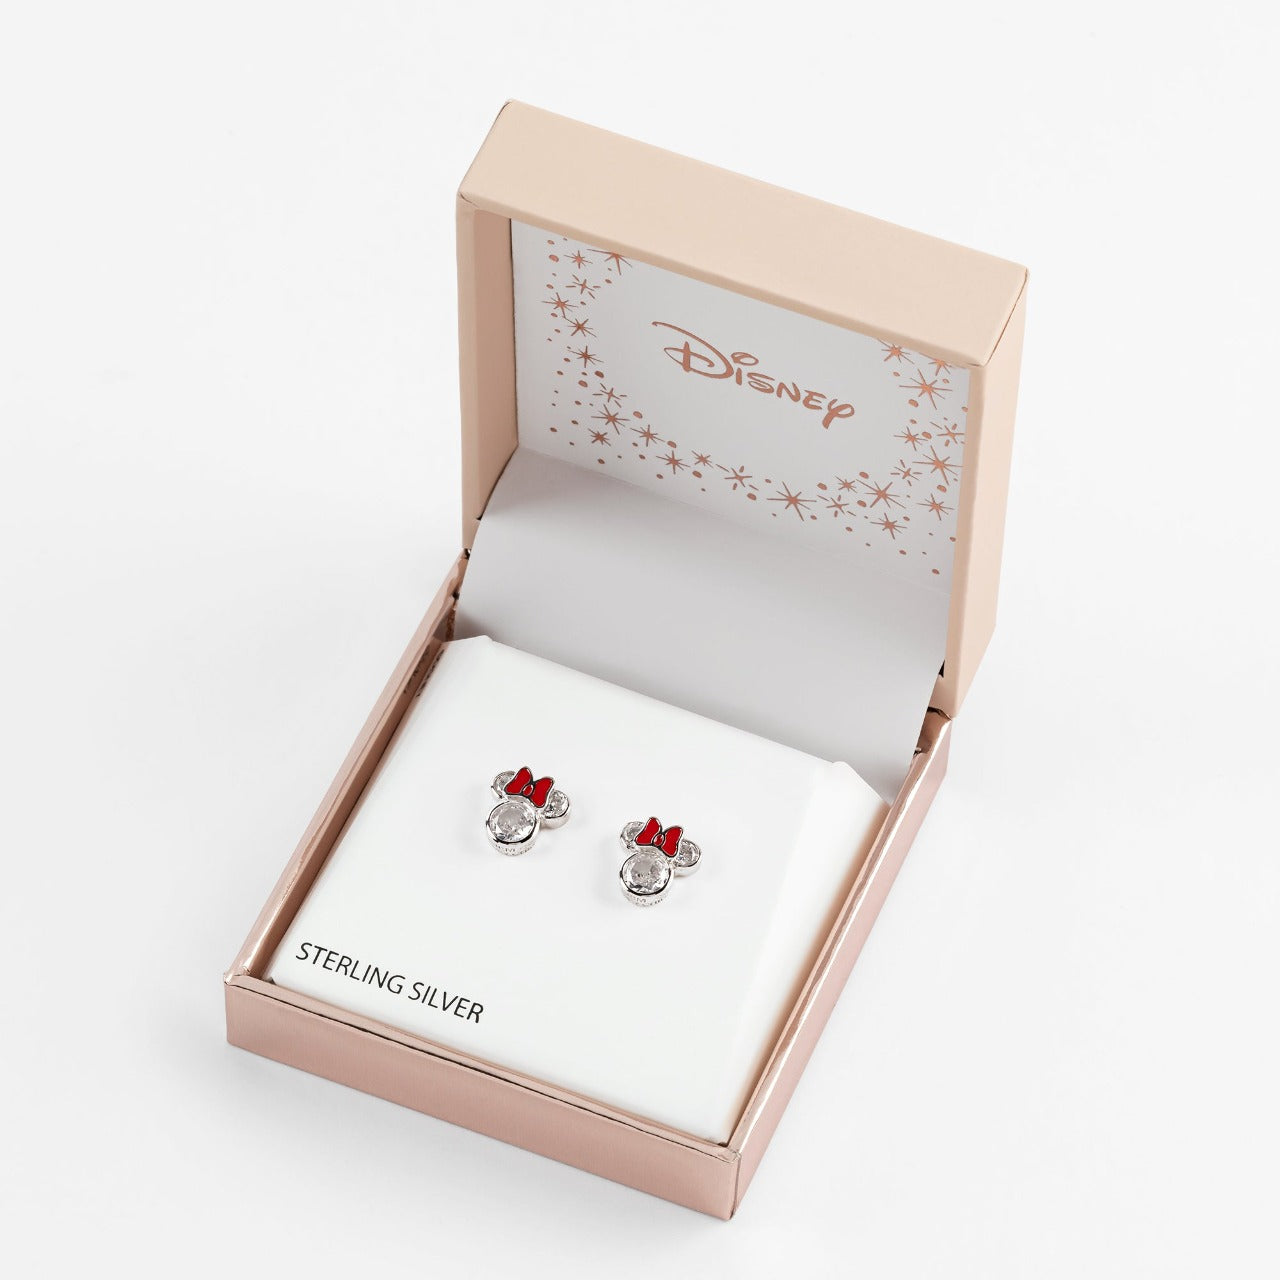 Disney Minnie Mouse Sterling Silver CZ Crystals With Red Bow Stud Earrings  Very pretty and charming Minnie Mouse shaped earrings with Cubic Zirconia stones that gives them a diamond like sparkle for a classy and sophisticated look with a beautiful bright red bow.  Trendy and fashionable design, the Disney Minnie Mouse Cz Crystal Silver Stud Earrings add a chic, fun touch to any outfit.